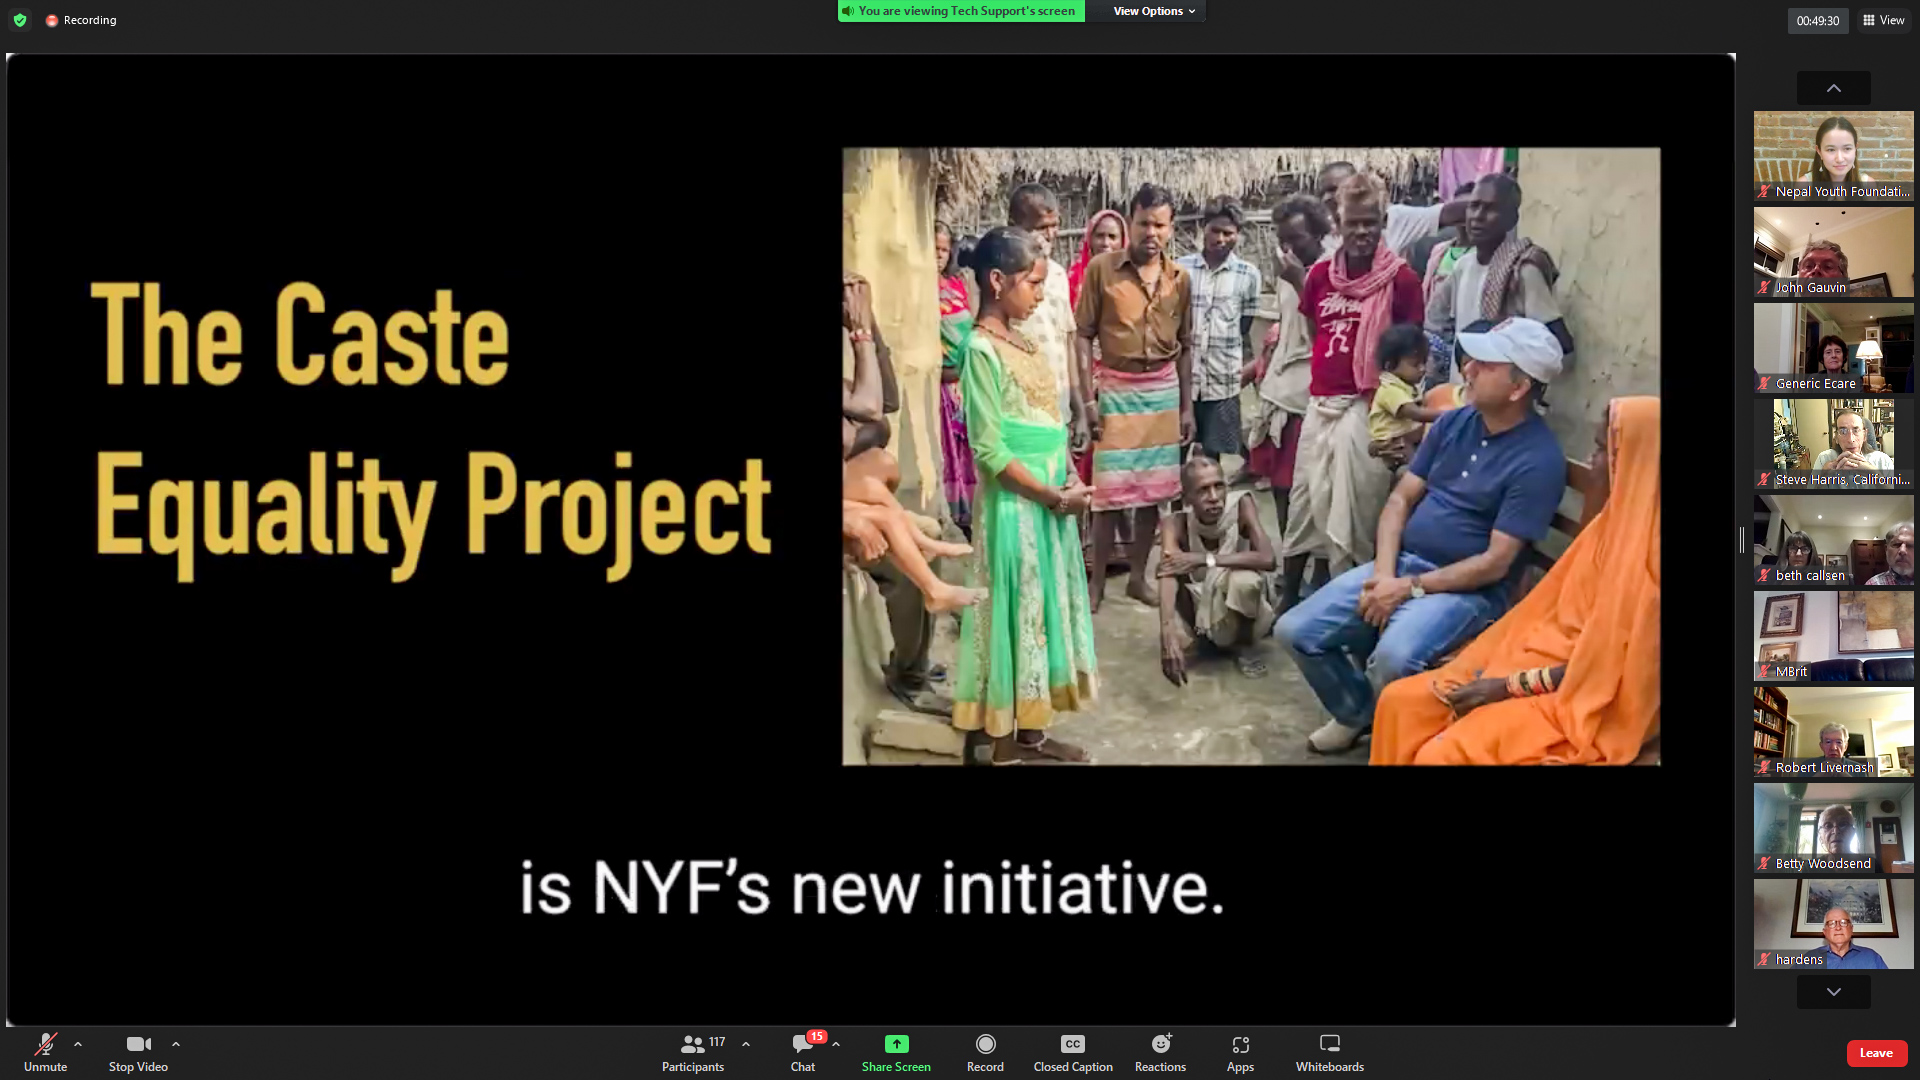 A Zoom screenshot of a presentation highlight. The text says "The Caste Equality Project is NYF's new initiative" and the main photo is of a community of Musahar Dalits in eastern Nepal speaking to NYF president Som Paneru while he listens intently. A thin bar of 9 random Founder's Day attendees are visible at the right of the image.